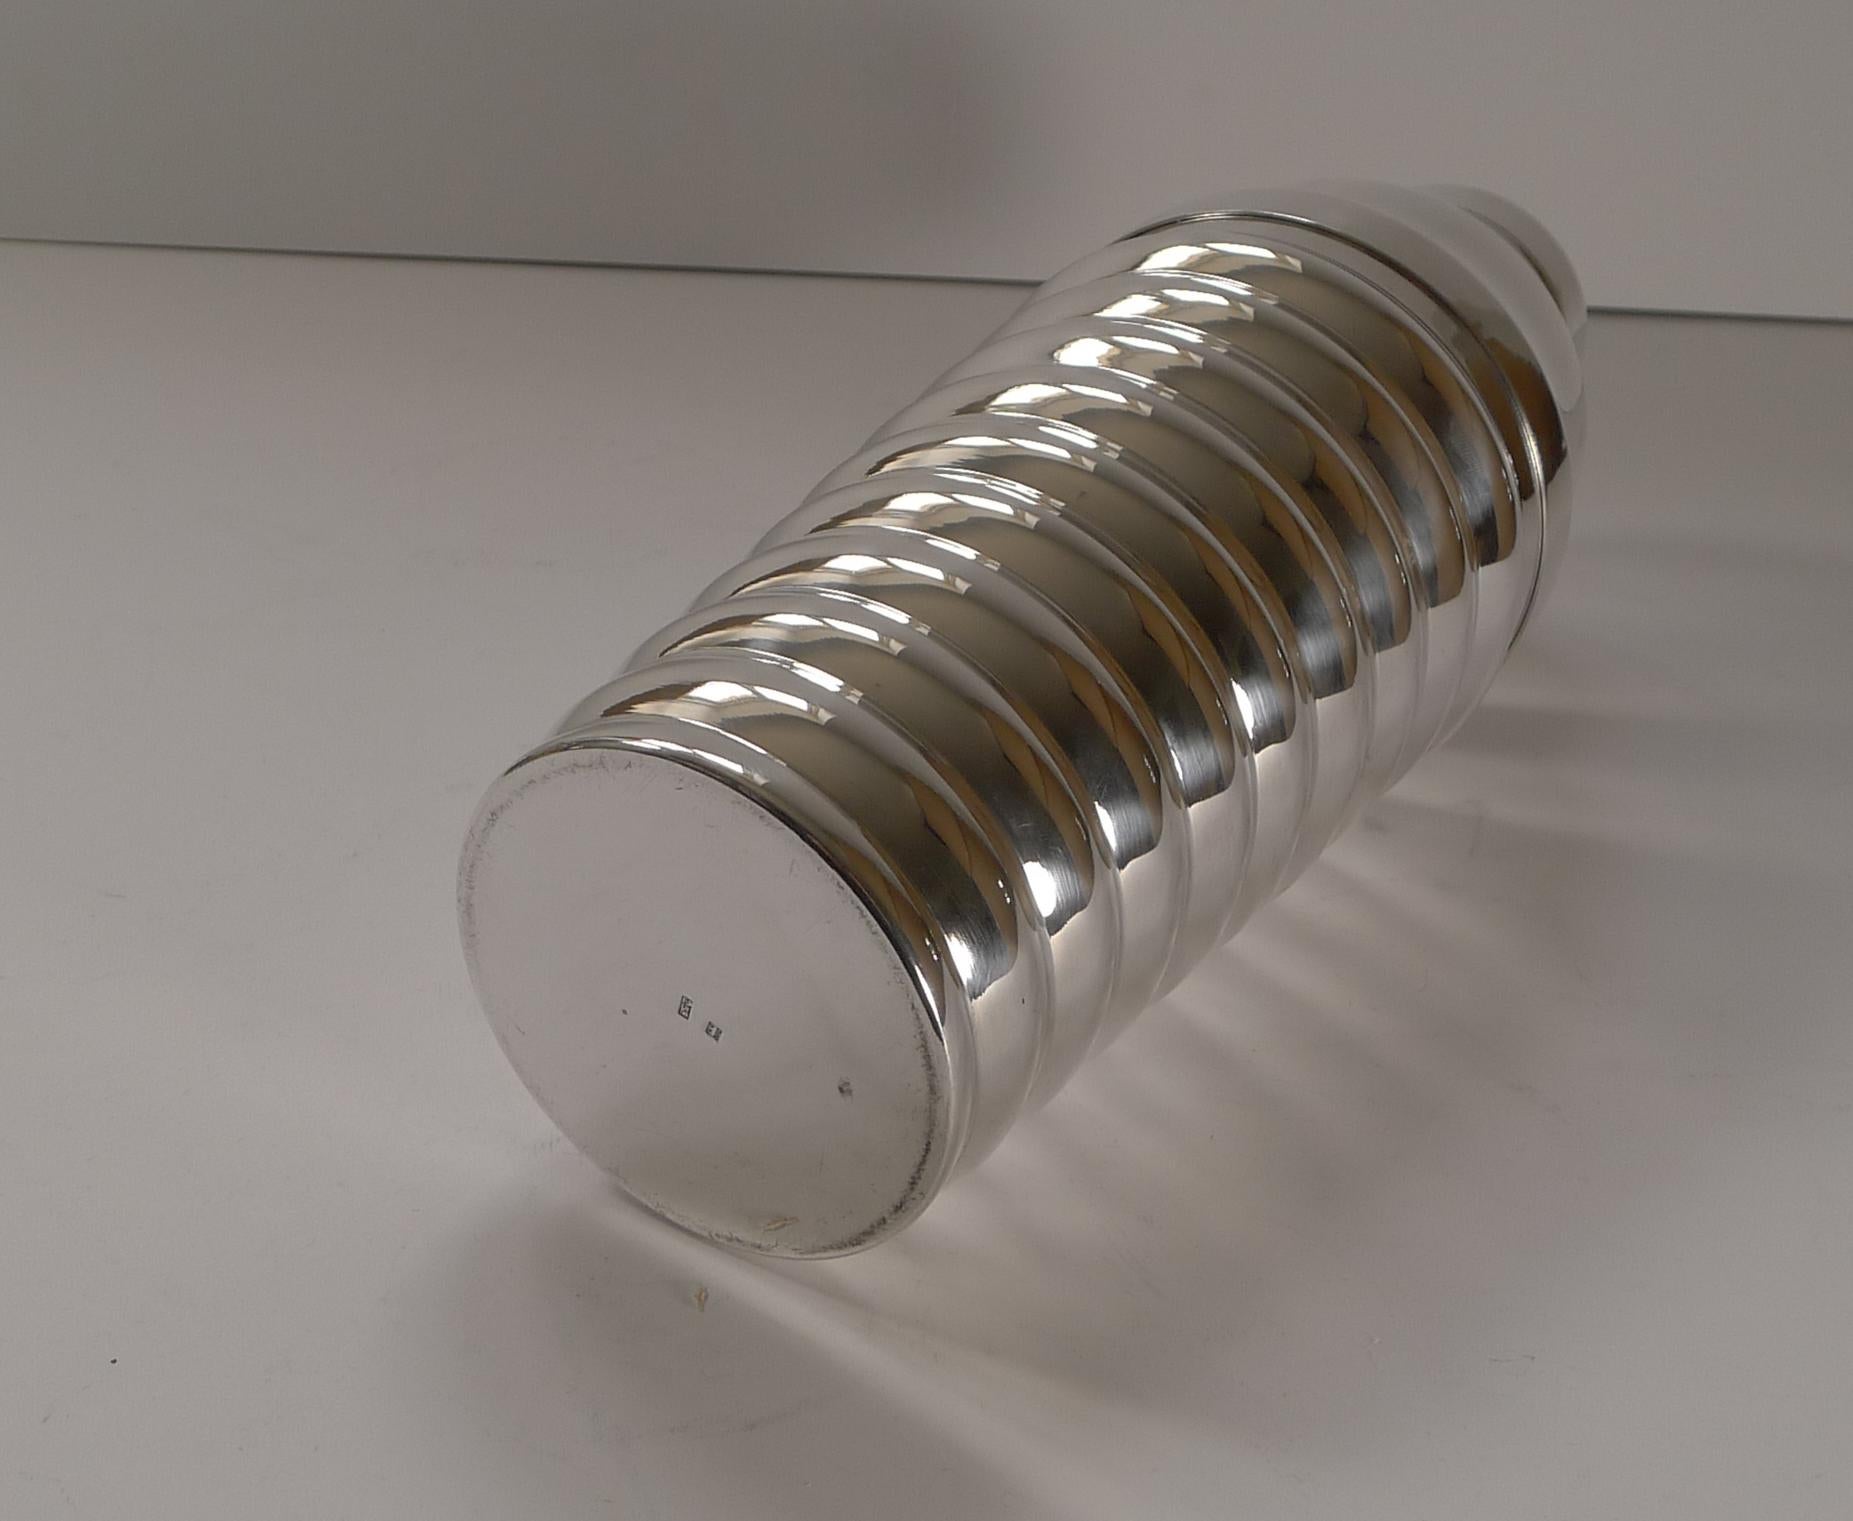 Mid-20th Century French Art Deco Silver Plated Cocktail Shaker by Mars, c.1930